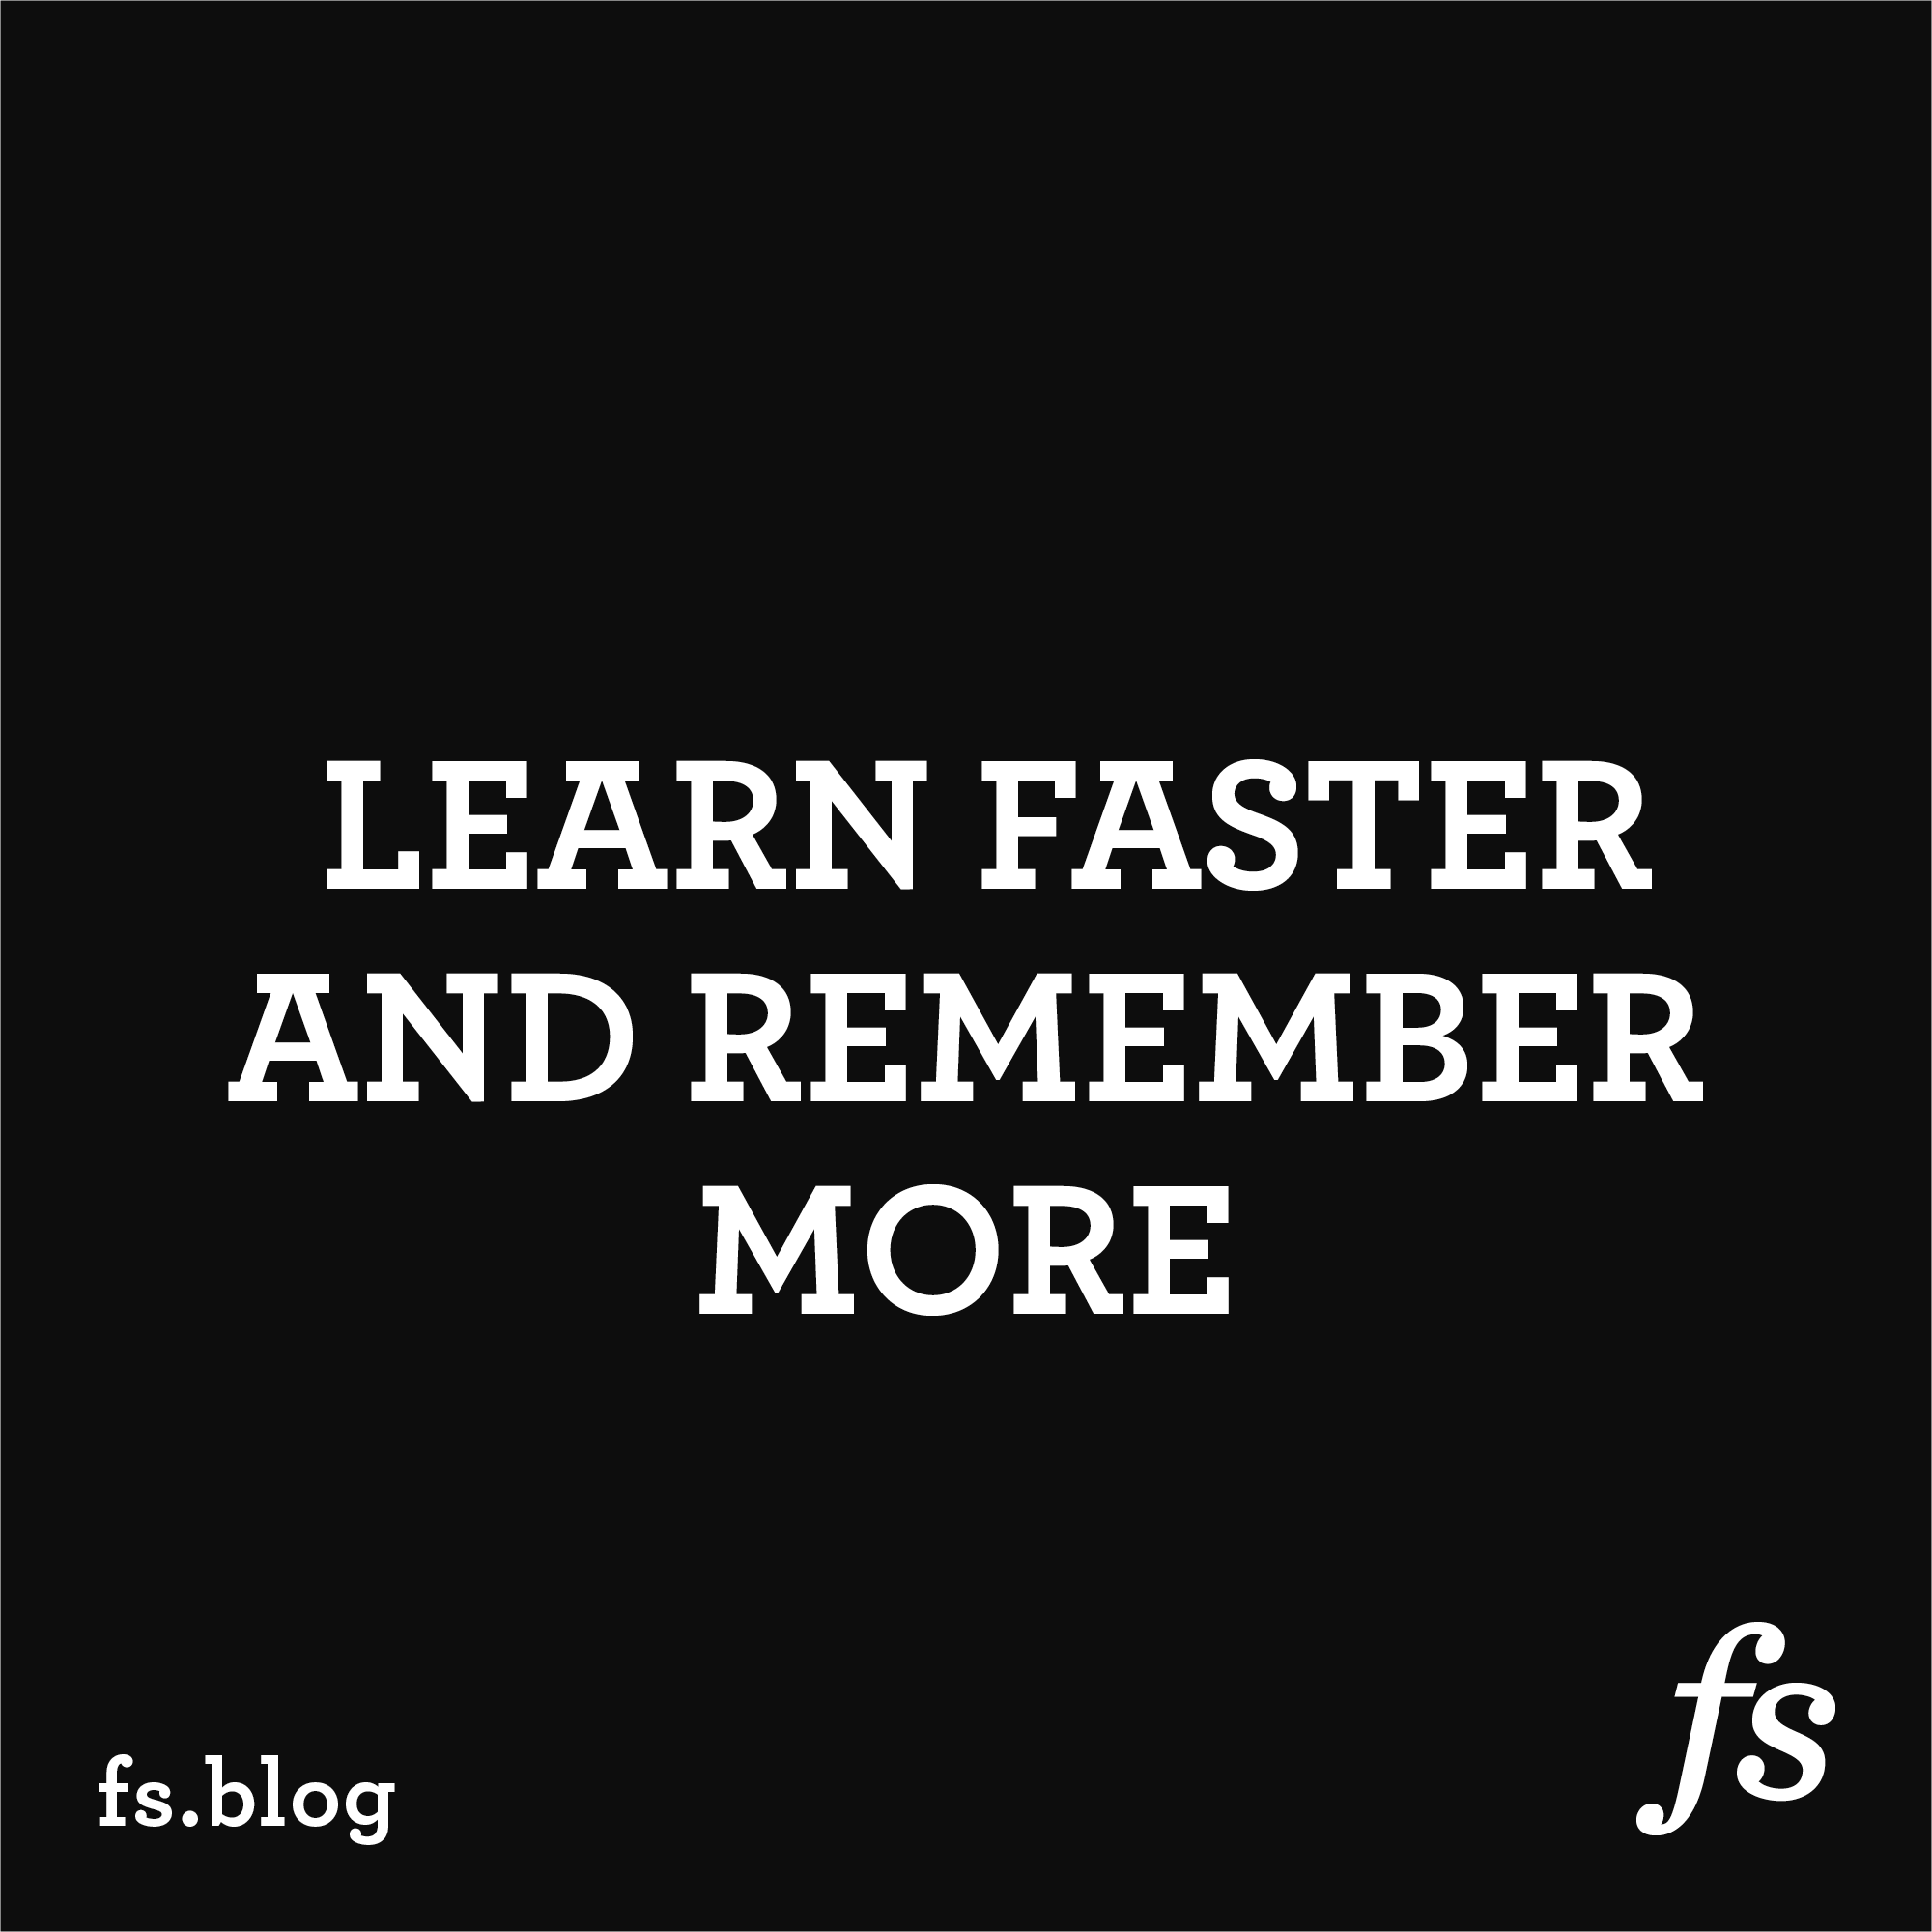 https://149664534.v2.pressablecdn.com/wp-content/uploads/2020/06/Learn-Faster-and-Remember-More.png